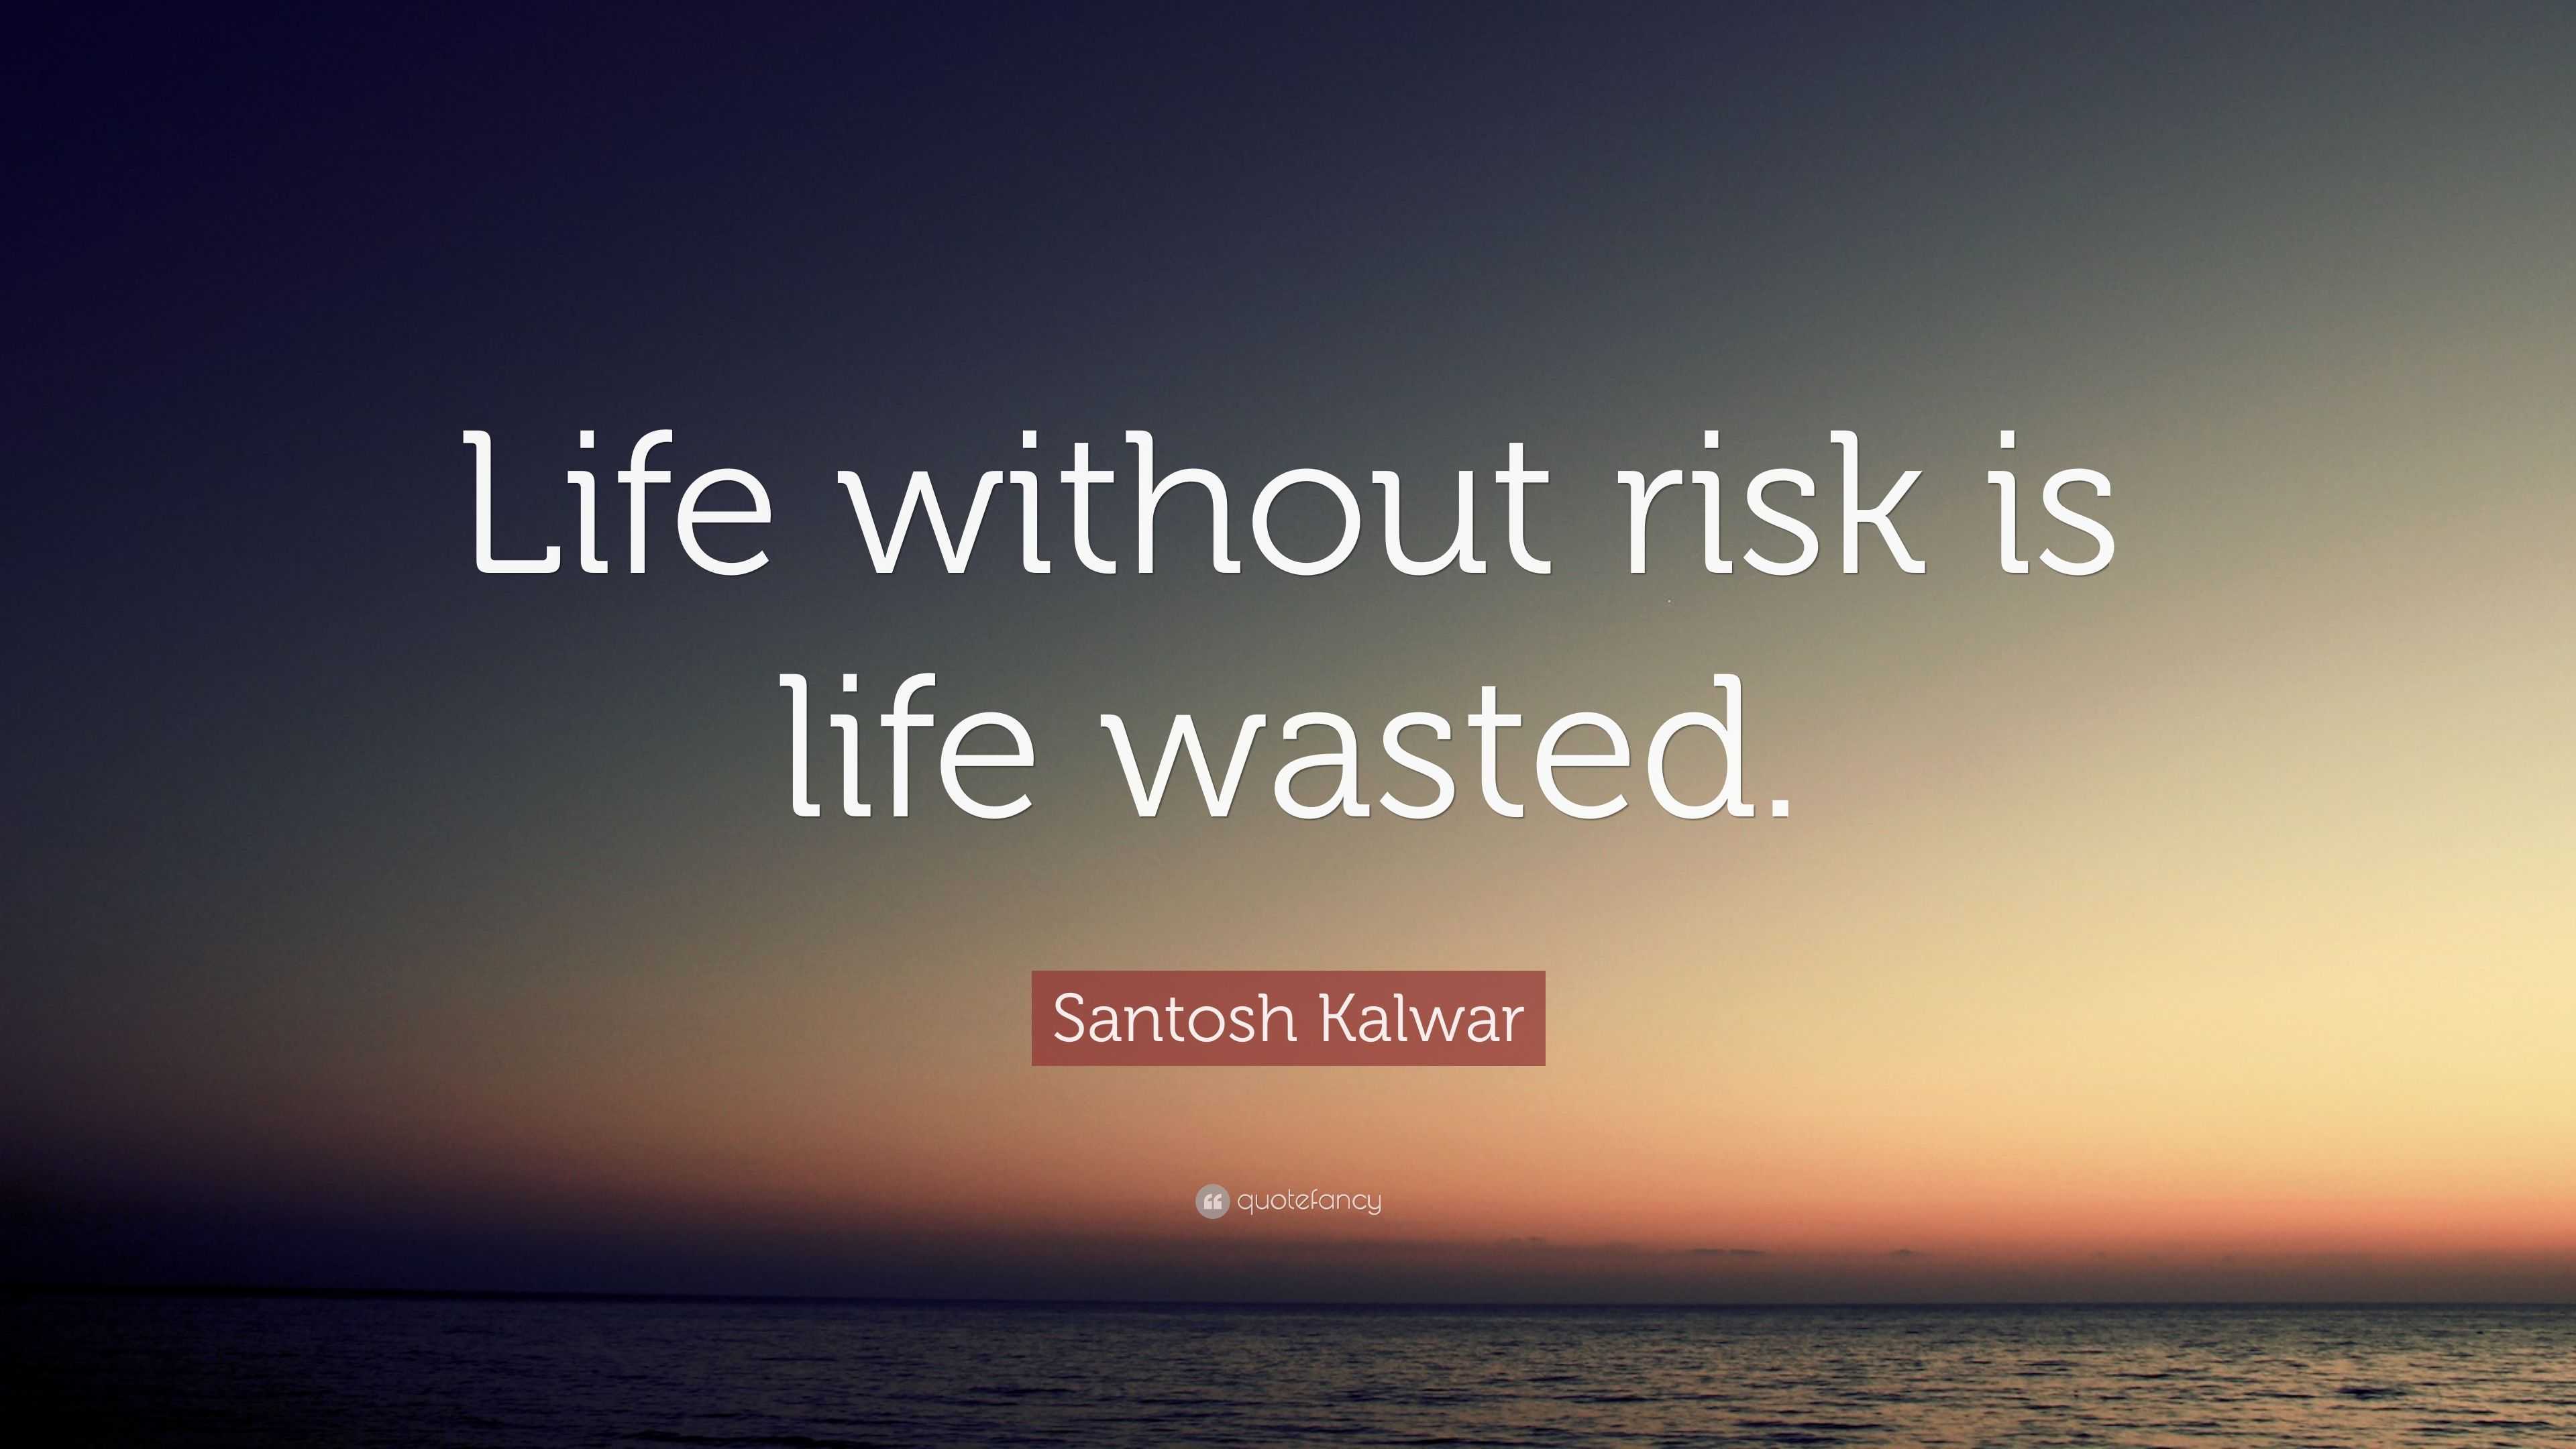 Santosh Kalwar Quote “Life without risk is life wasted ”